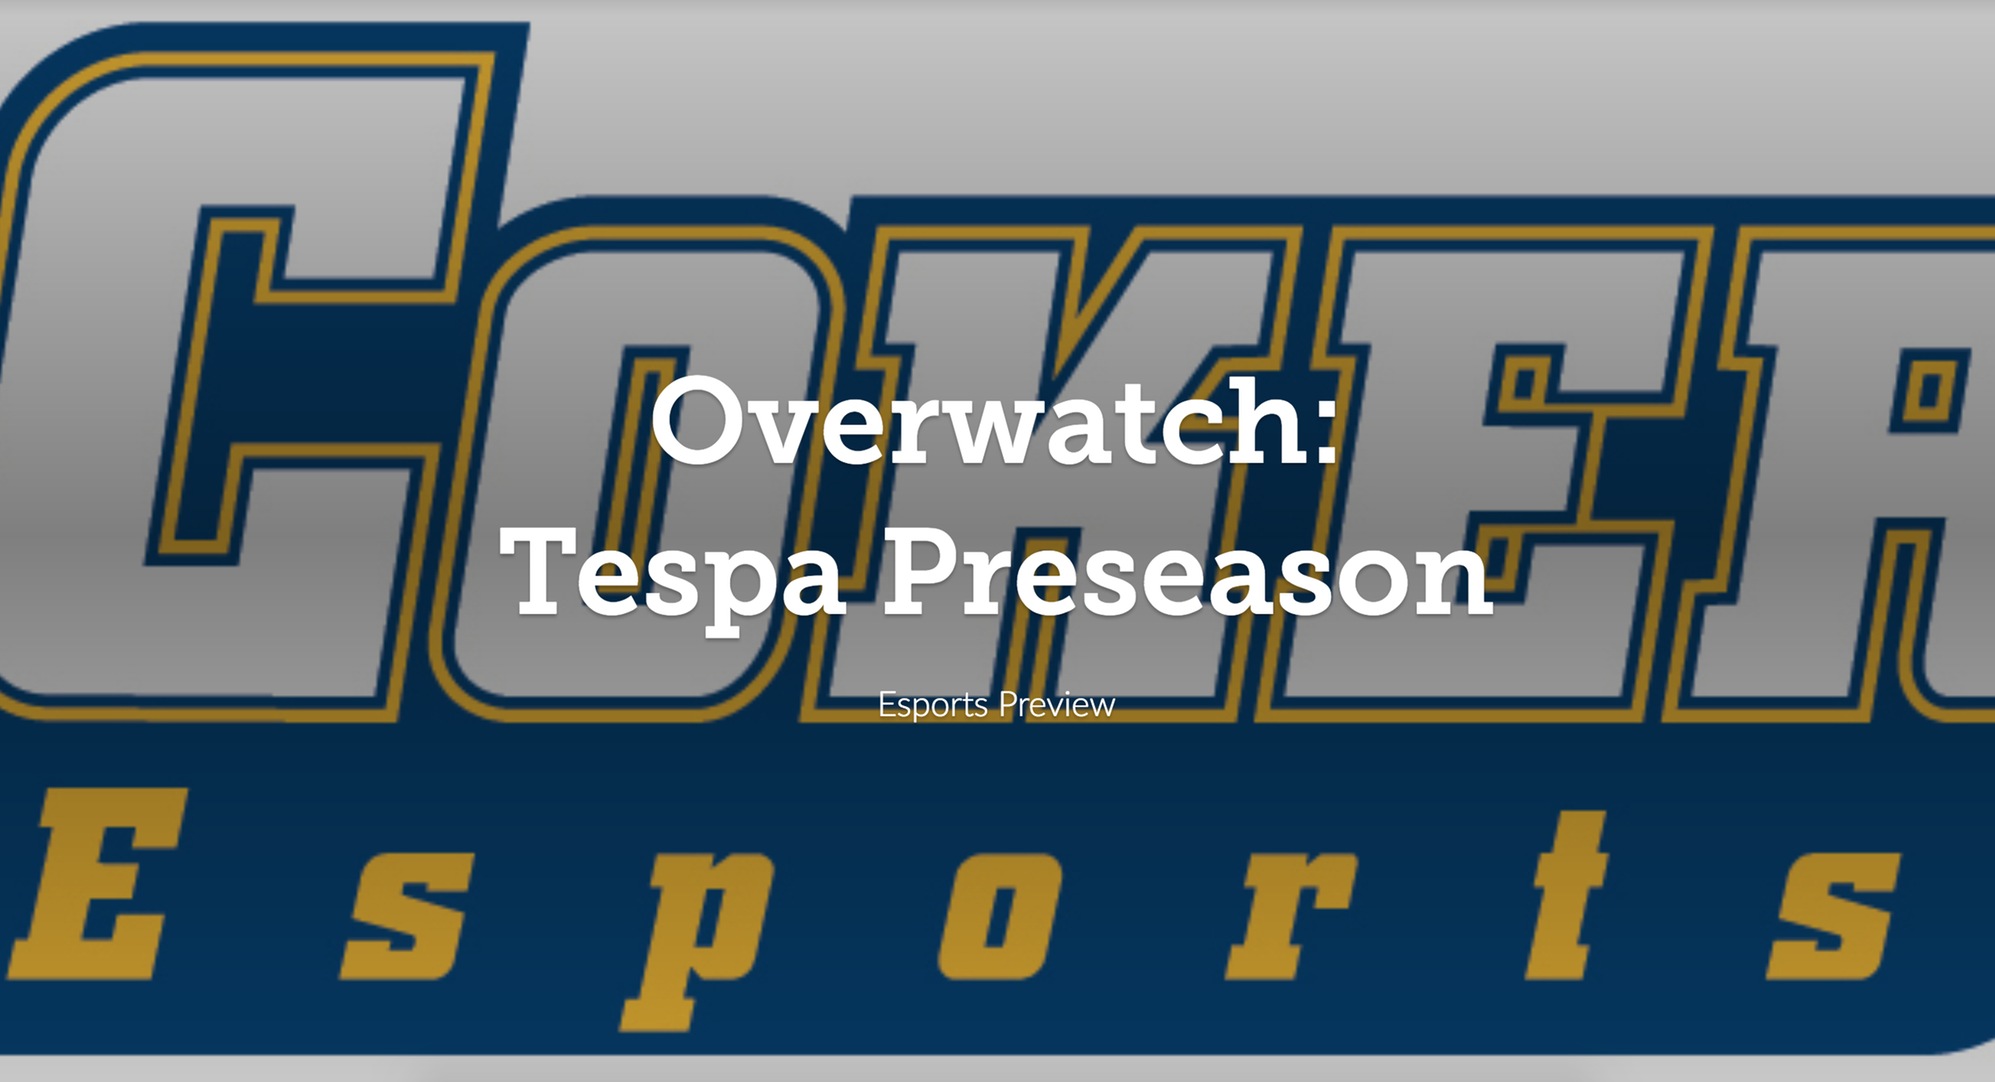 Esports to Compete in Overwatch Tespa Preseason Play